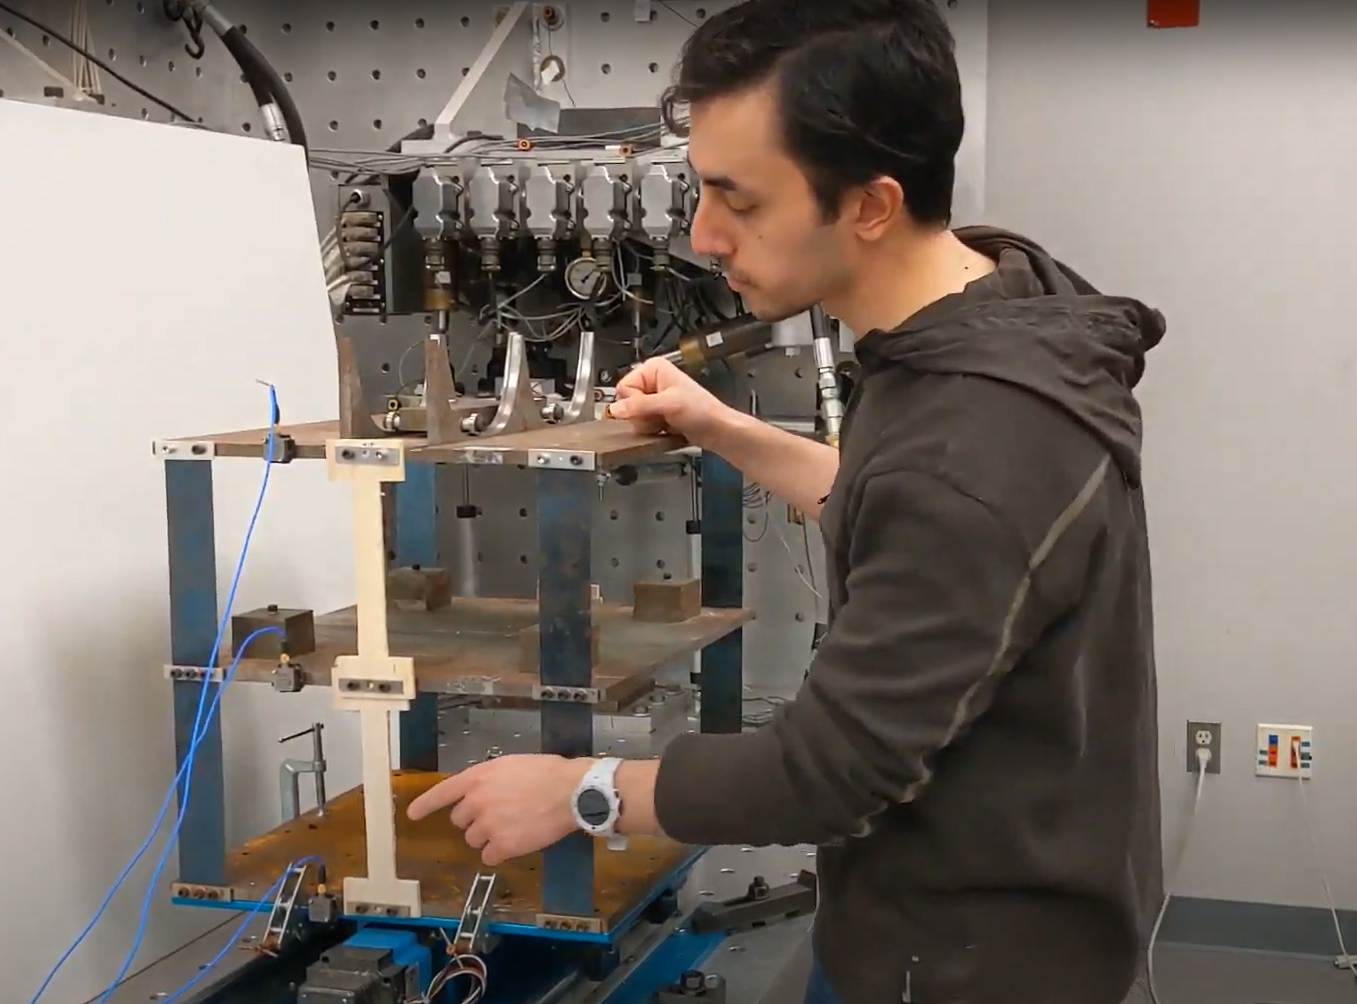 Najafi sets up a scaled model of a two-story steel structure on a shake table. The model has multiple sensors and wires attached to it.